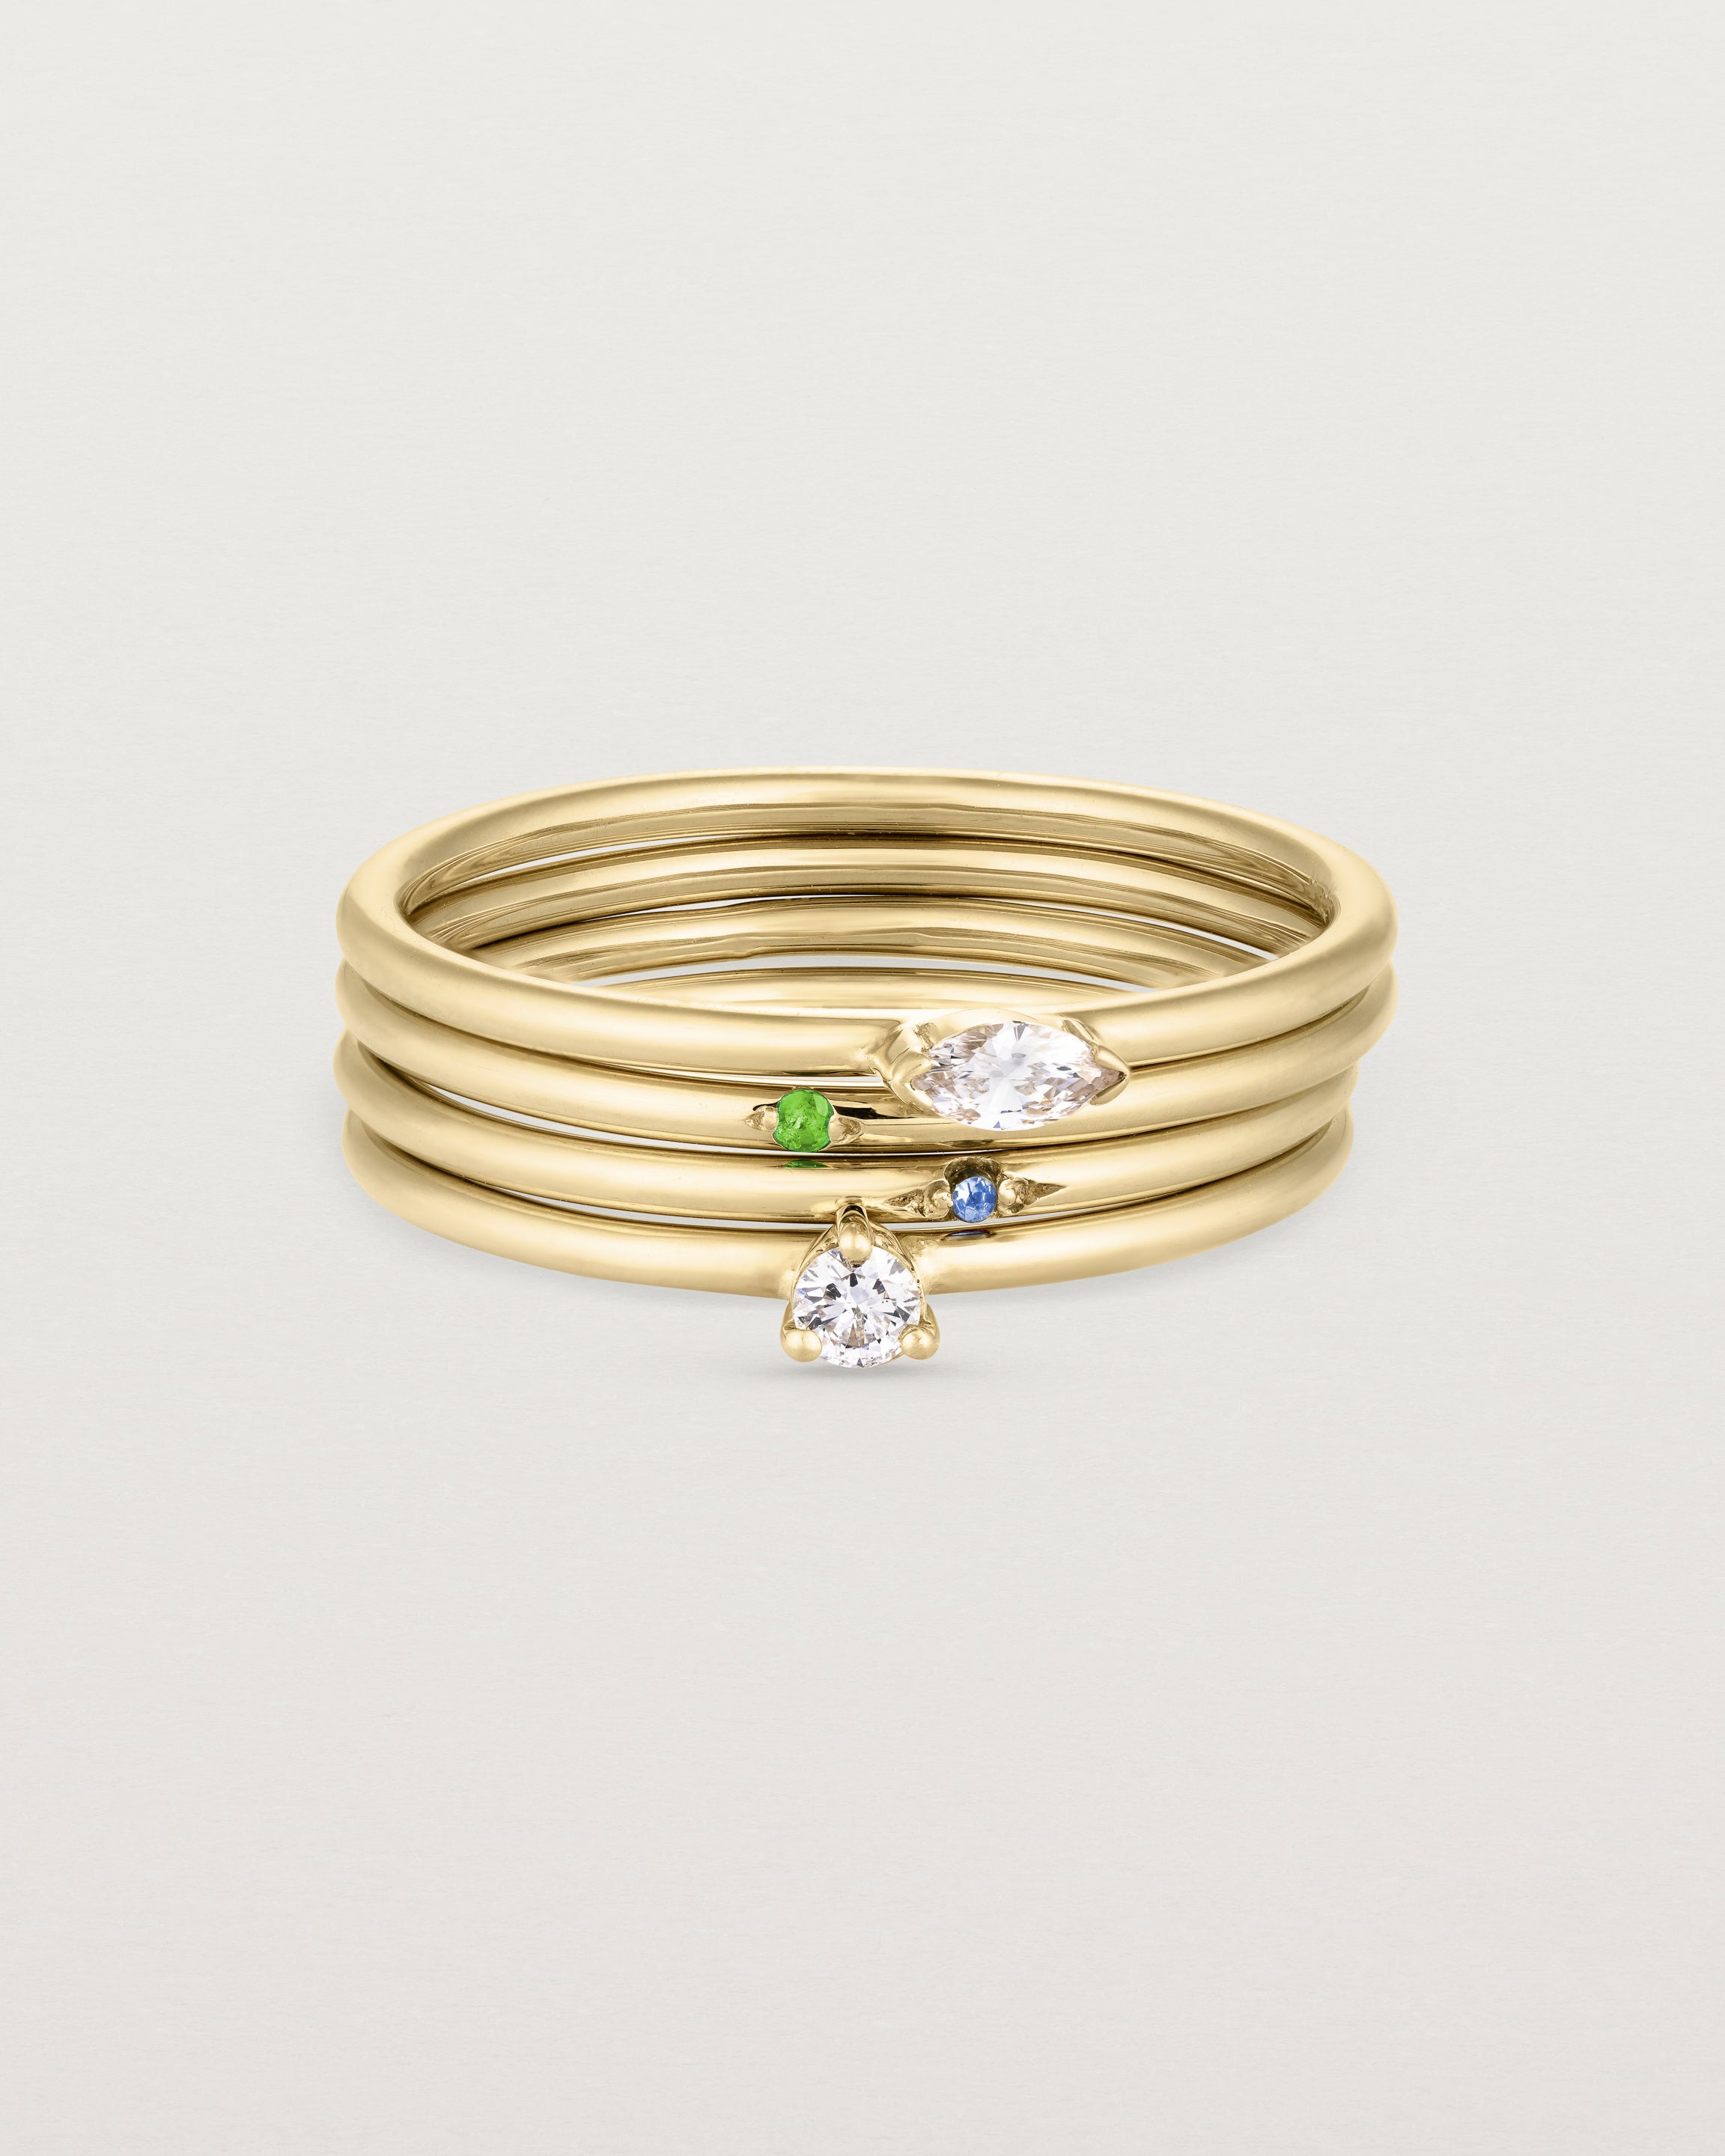 A set of four yellow gold rings, featuring white diamonds and blue sapphire and an emerald.